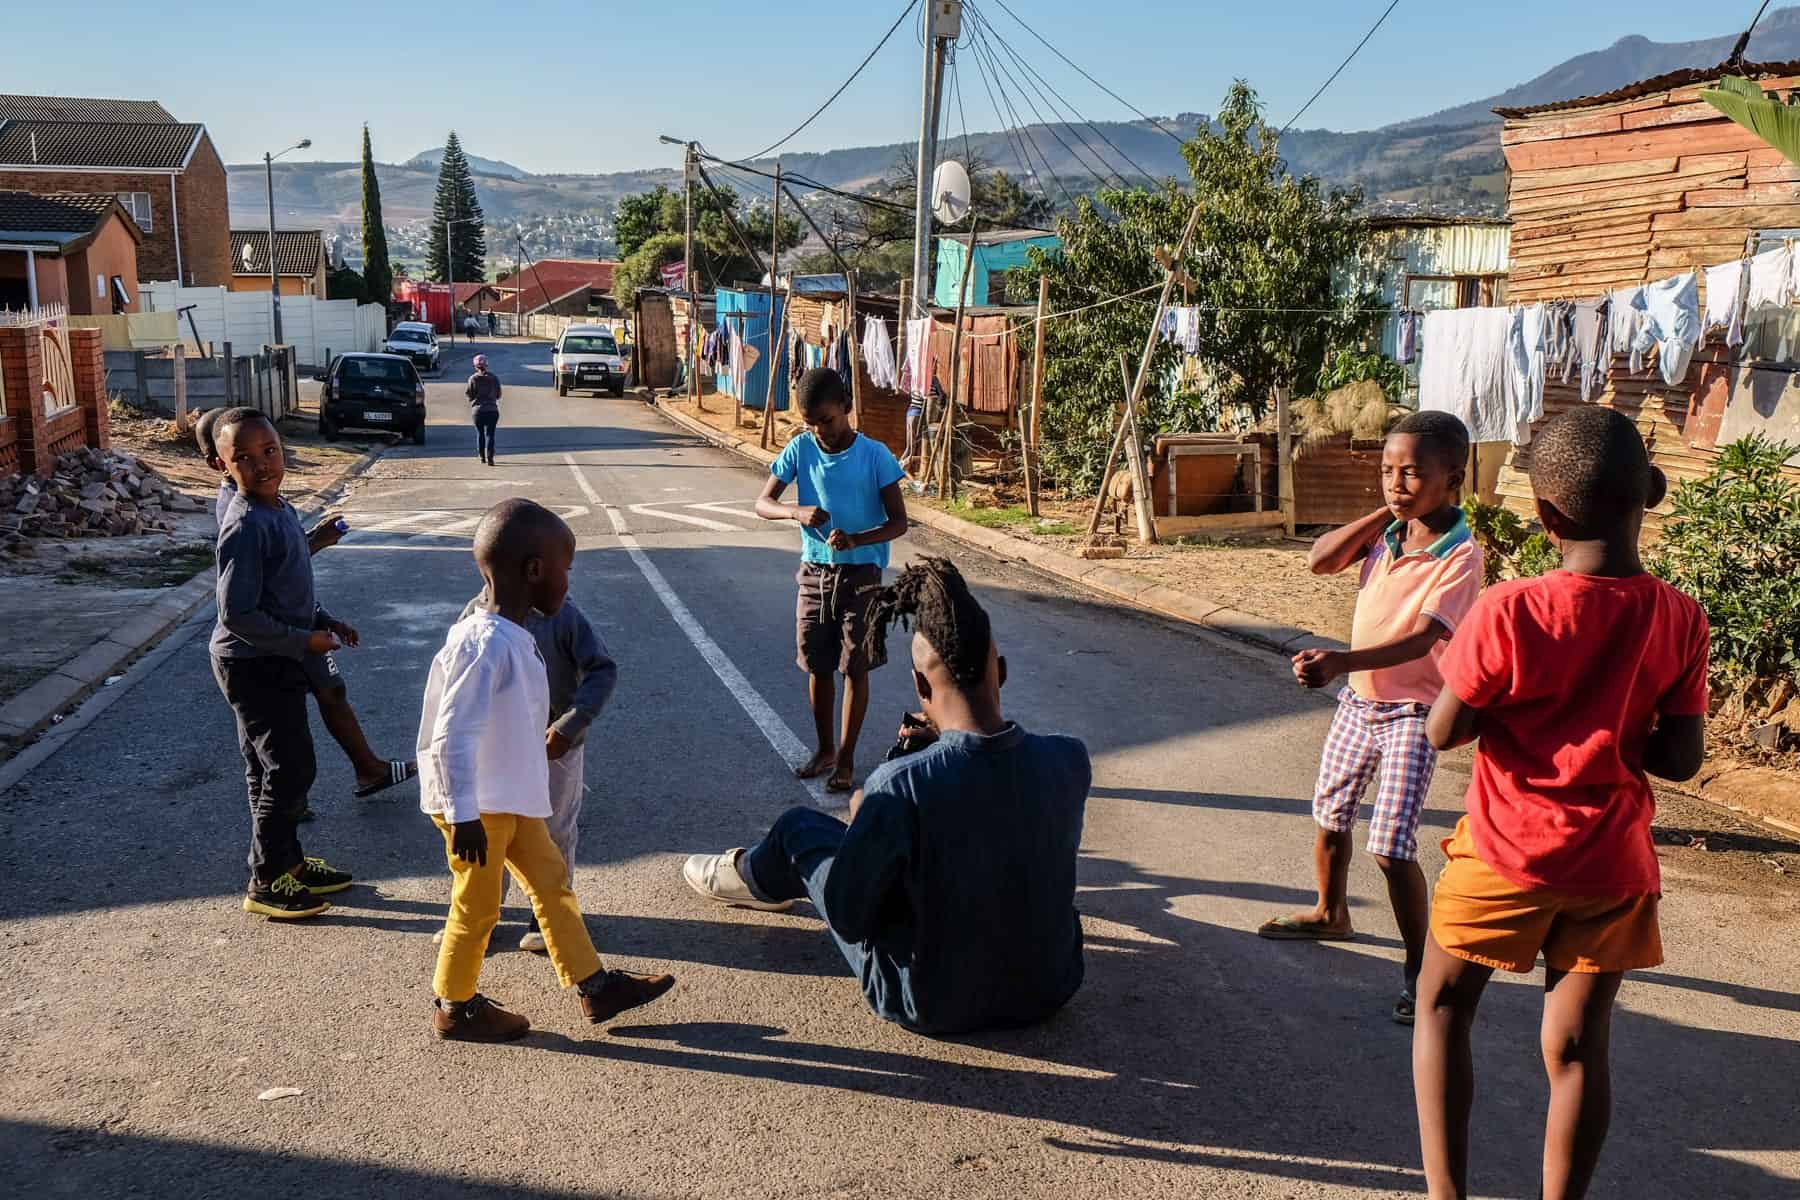 A man in a blue jean jumpsuit sits on the paved road in a South African township surrounded by five children. In the background are some houses, and hills in the far distance